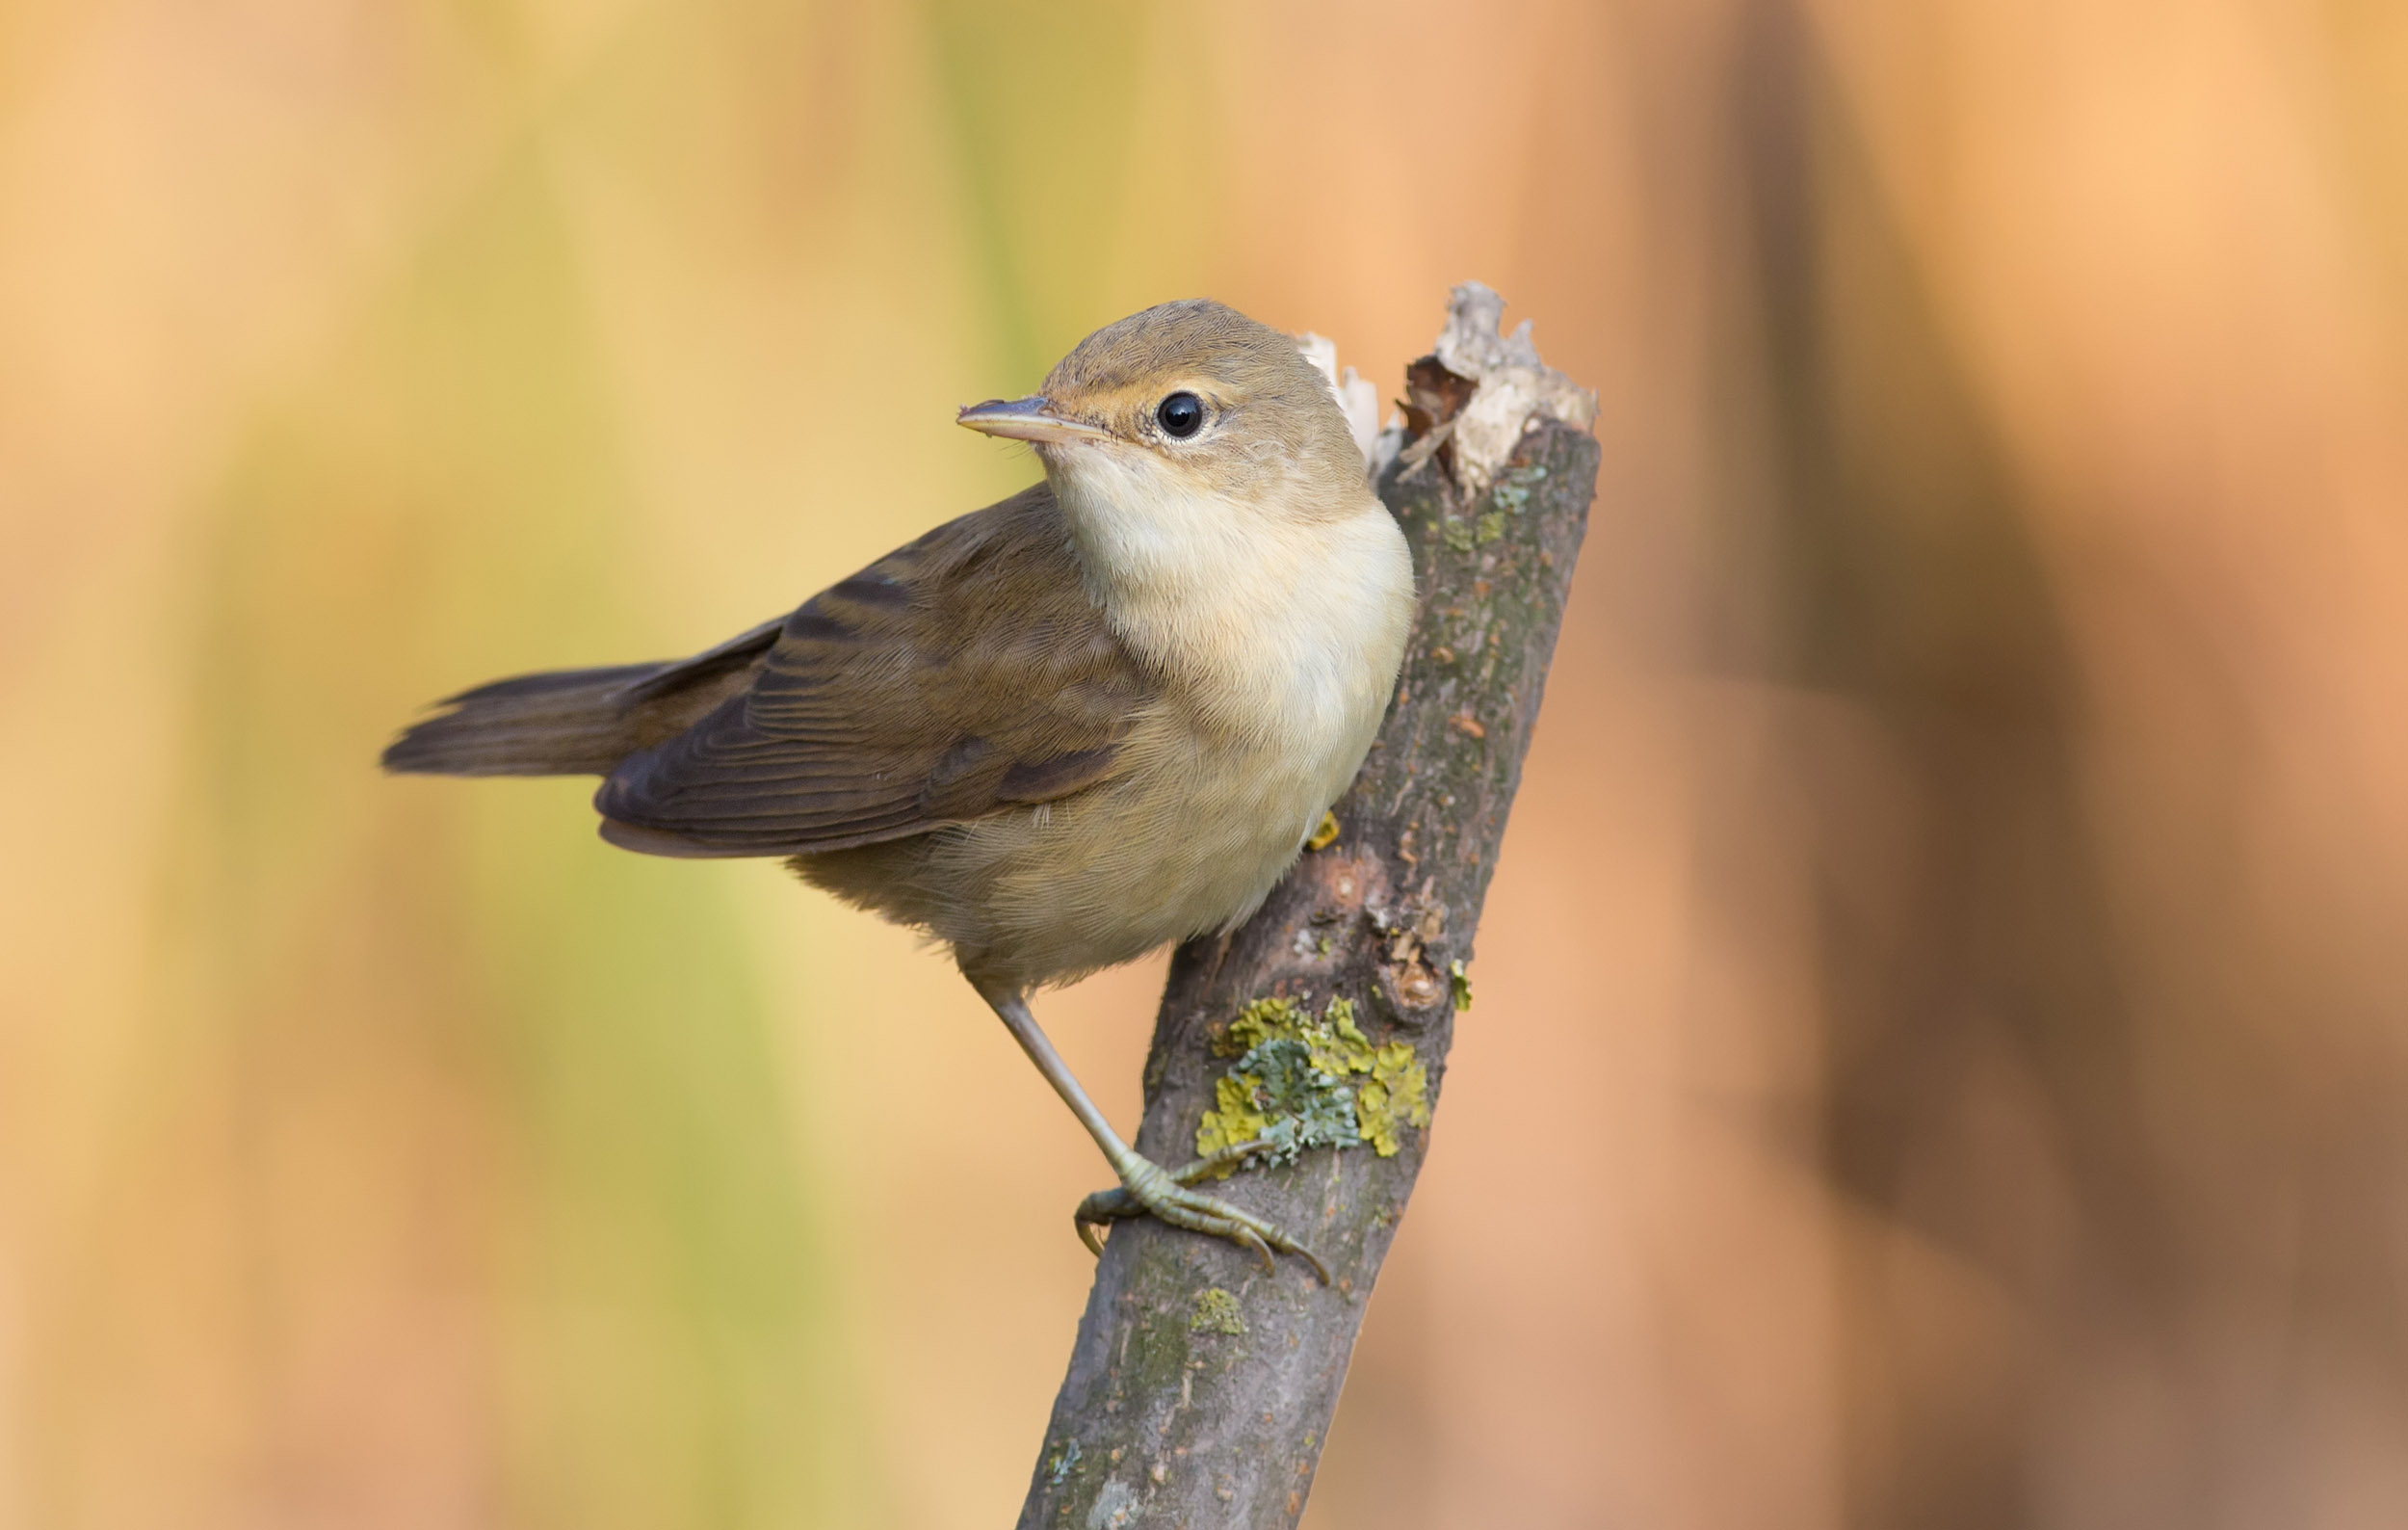 A Reed Warbler perched on a branch.